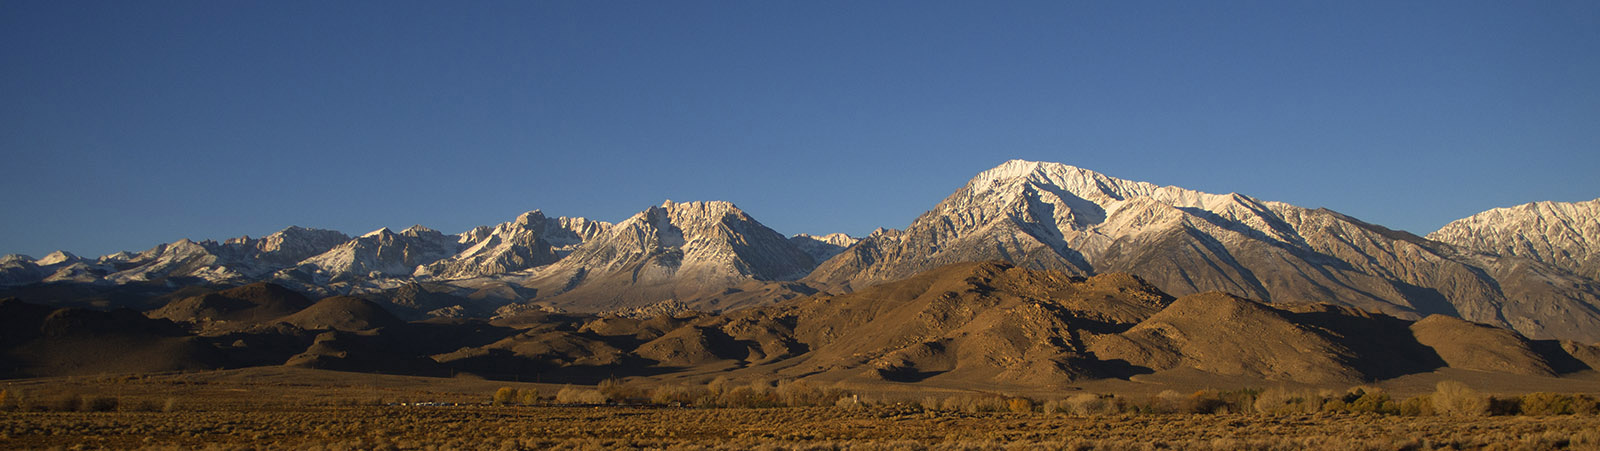 Snow dusted peaks of the Sierra Nevada near Bishop CA.  The Alabama foothills composed of both granite and other igneous rock are in the foreground.